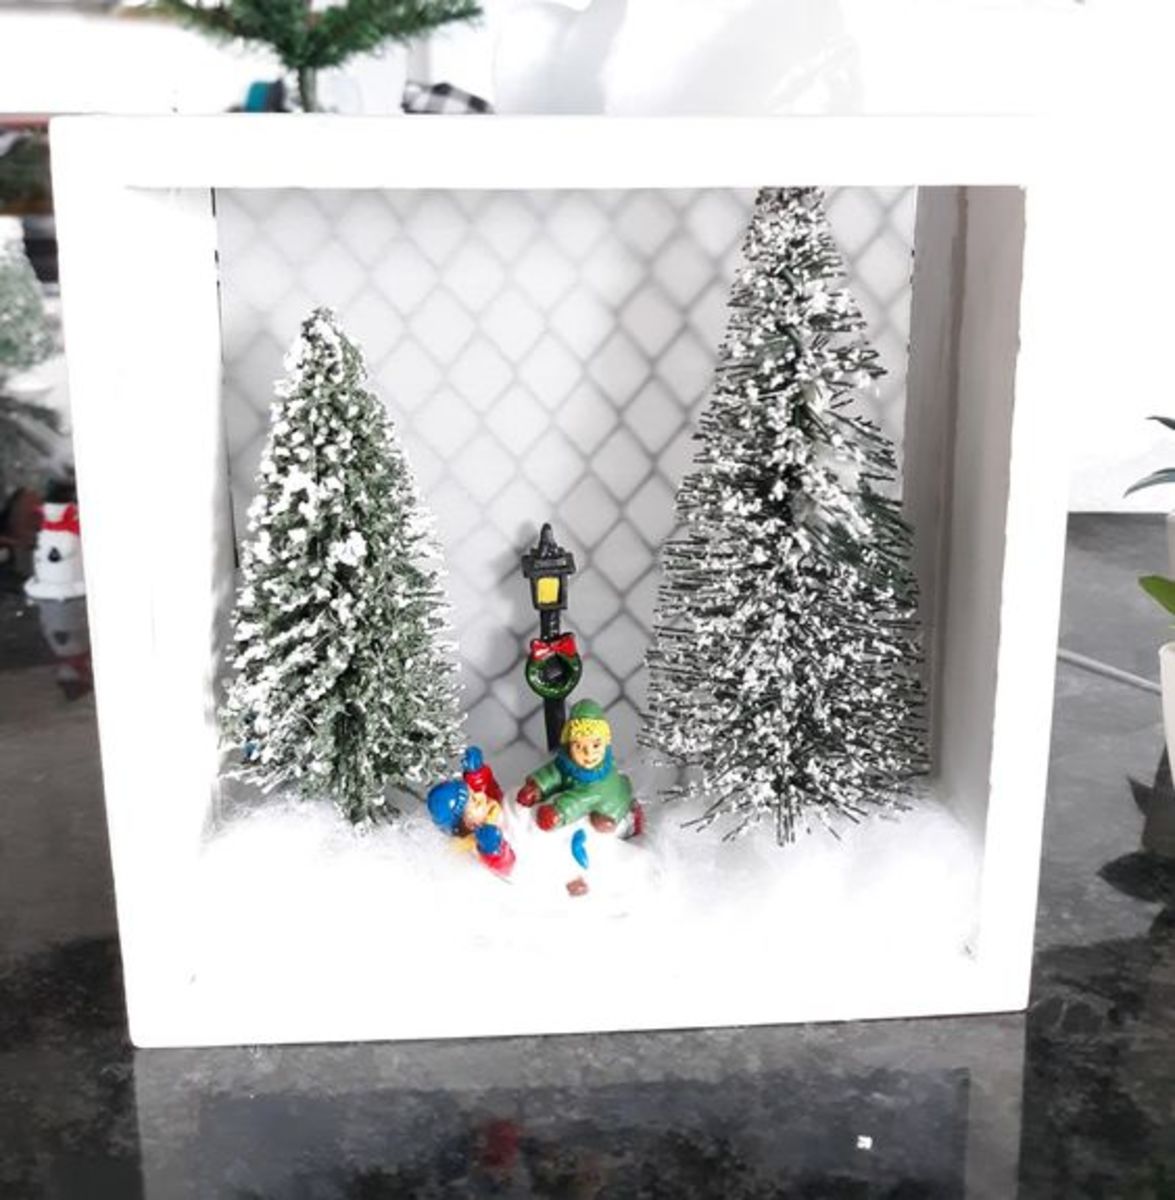 Create an outdoor scene of children playing in the snow.